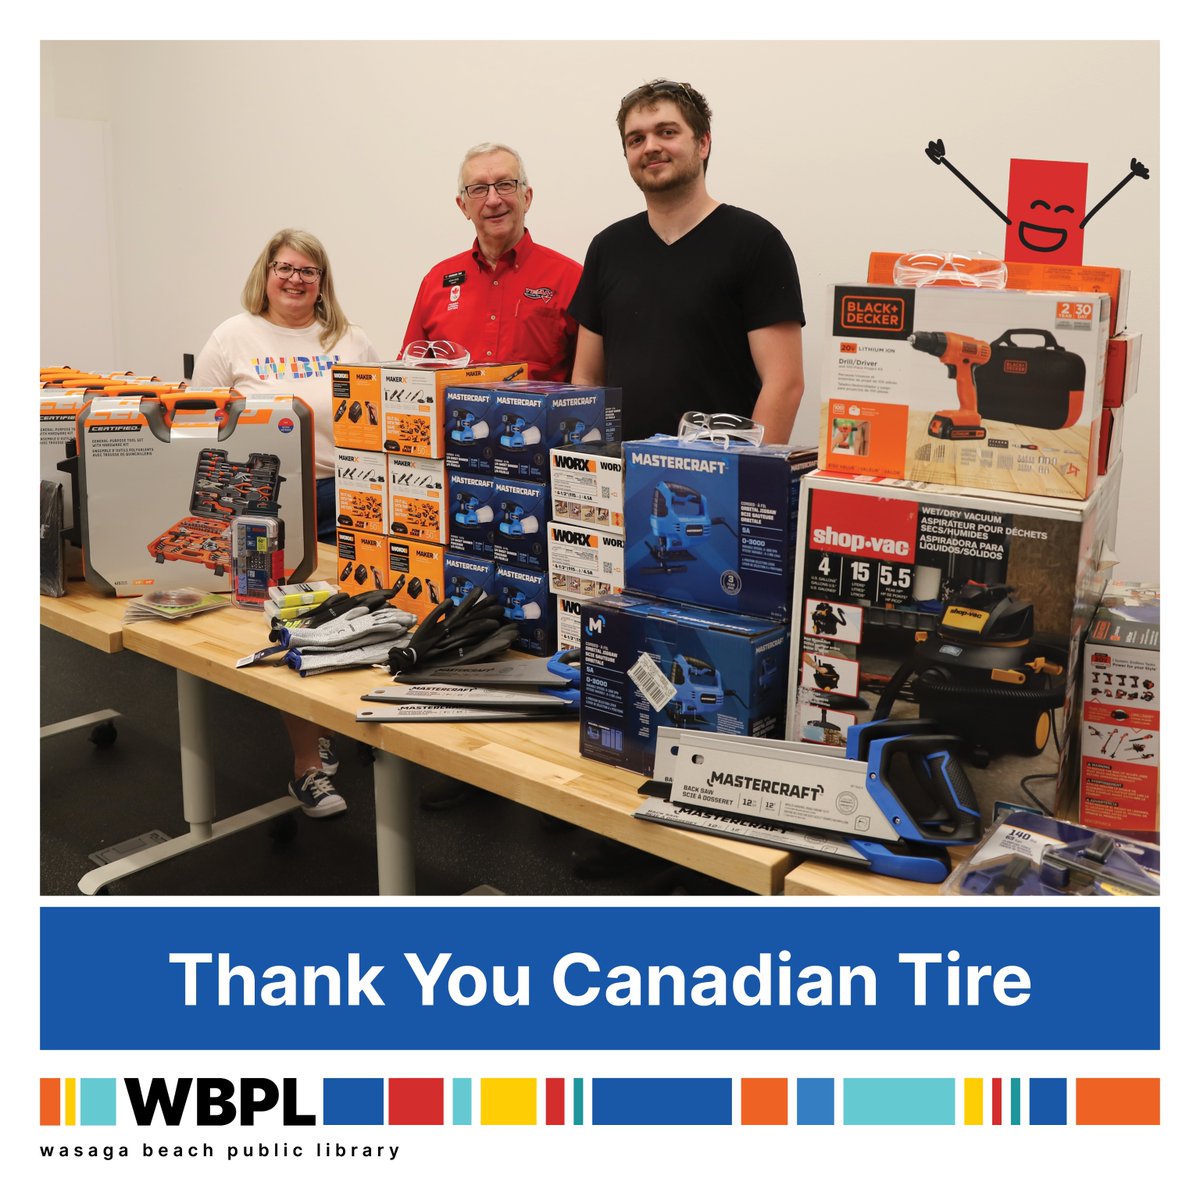 A huge thank you to Kenn Voss and Noah Carriere from Wasaga Beach Canadian Tire for their generous donation of tools to our Makerspace! 🛠️ Your support empowers creativity and innovation in our community. #FindItHere #Makerspace #WasagaBeach